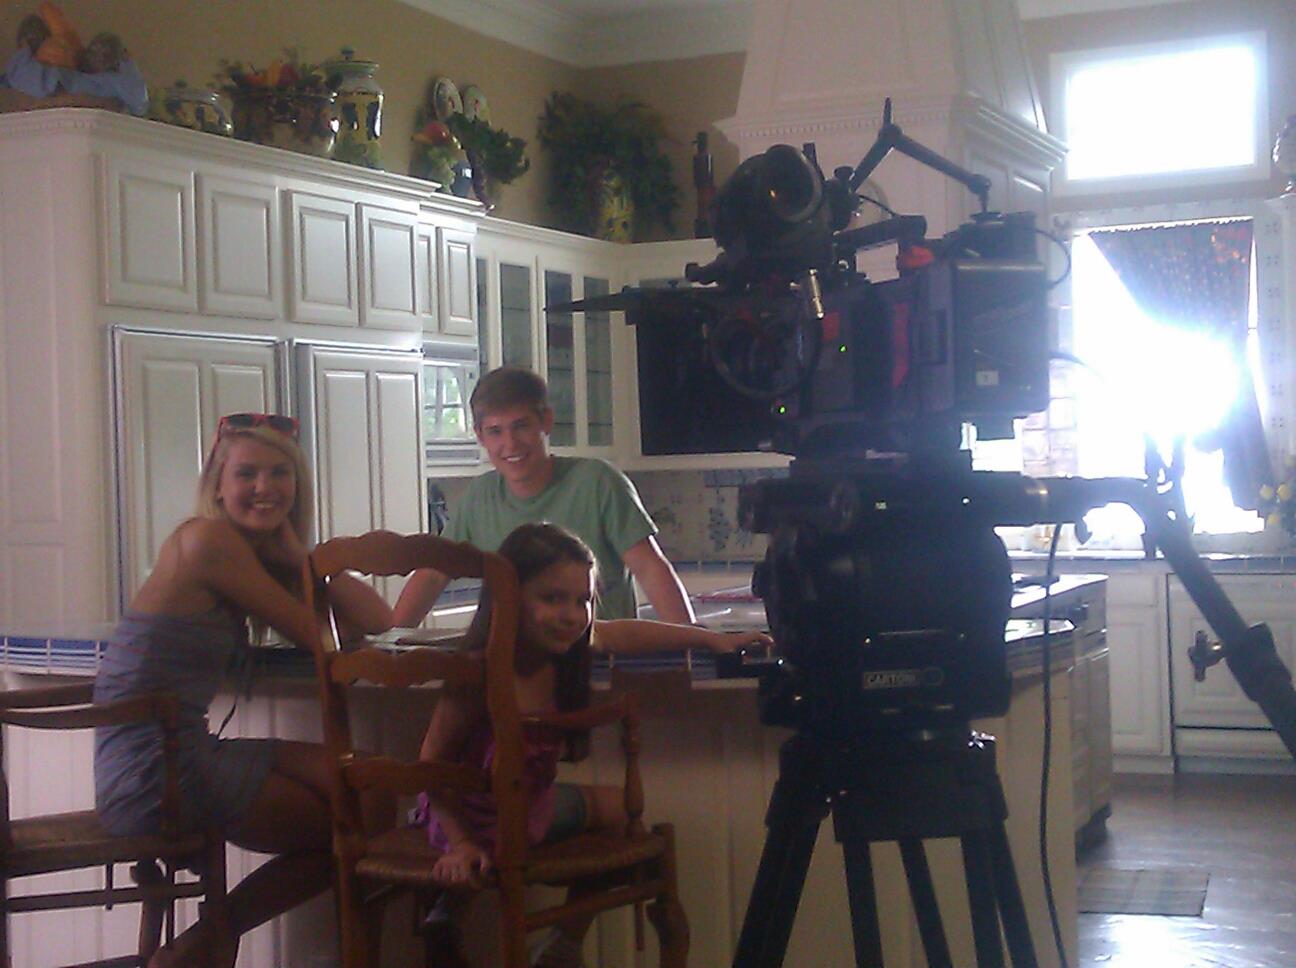 Kenzie on set as Madison Baker filming Adventures of Bailey: A Night in Cowtown